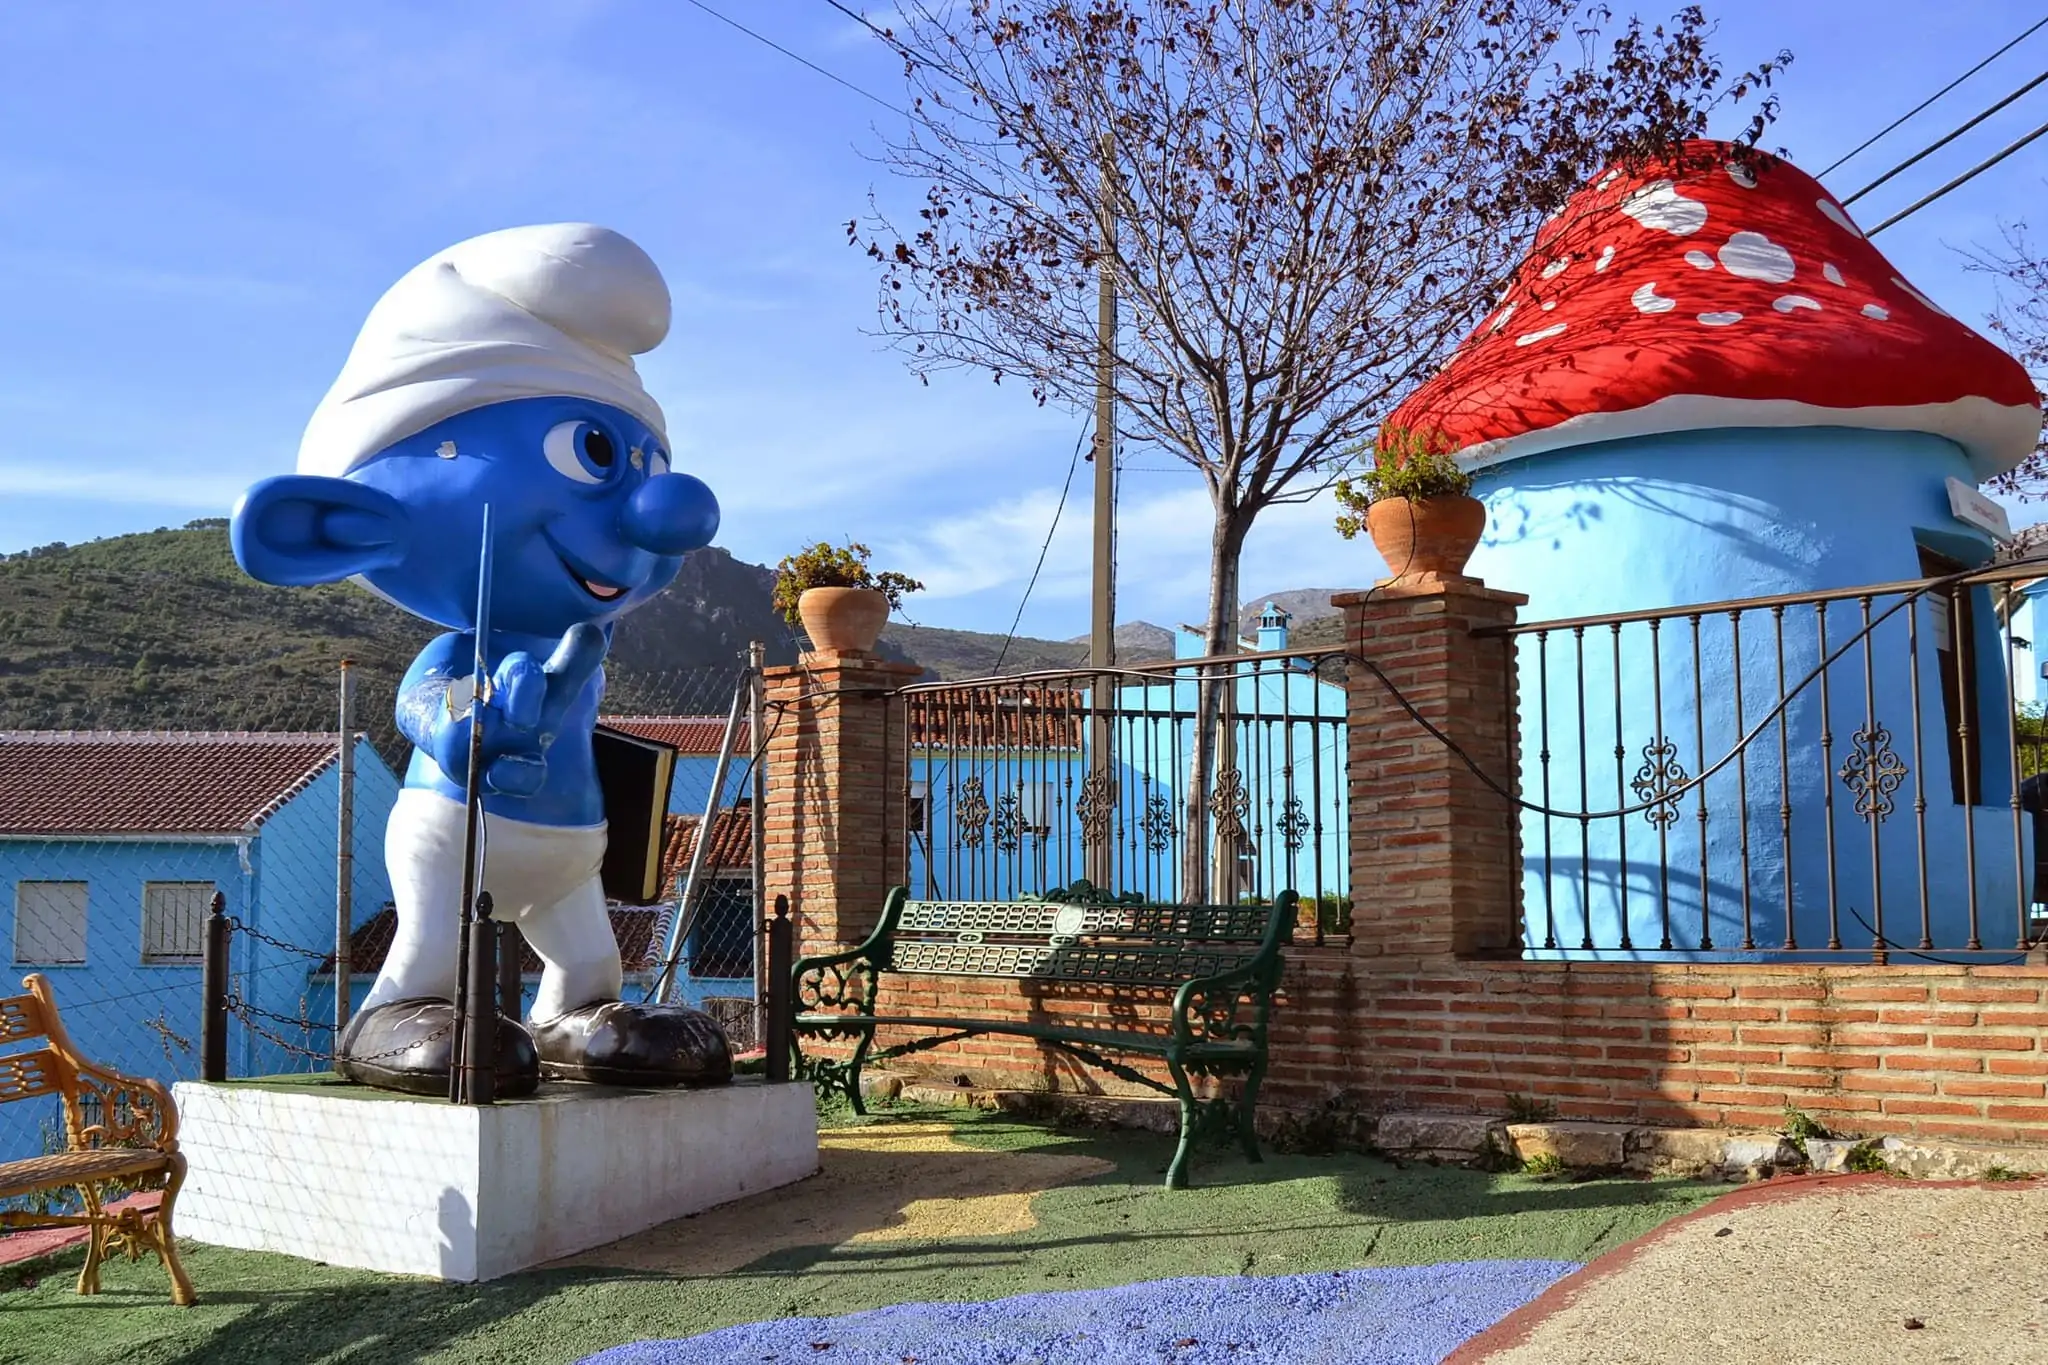 What to see in Júzcar, the blue village